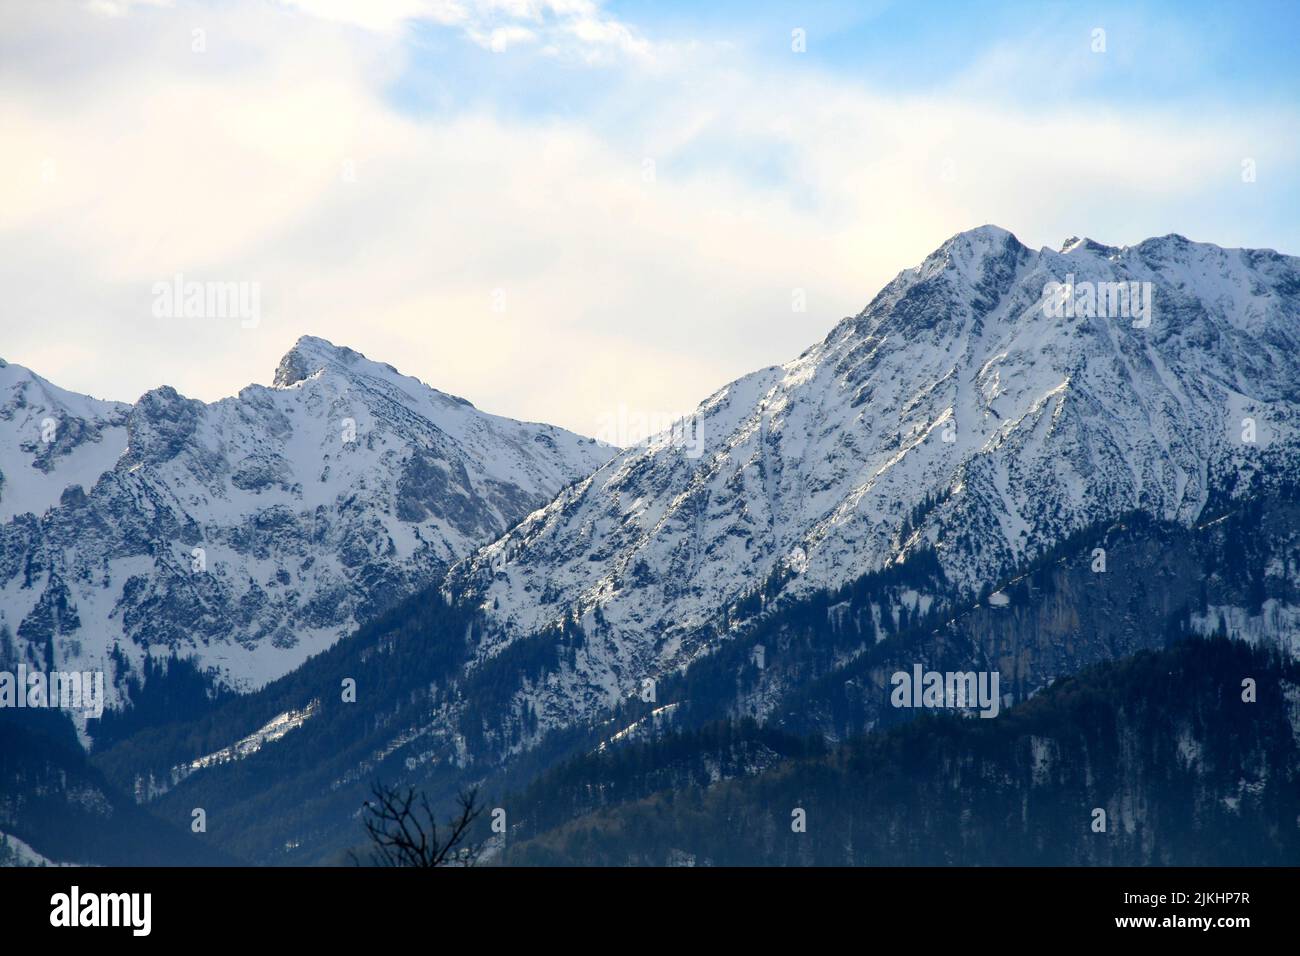 A breathtaking view of snowcap Alps on a cloudy sky background Stock Photo